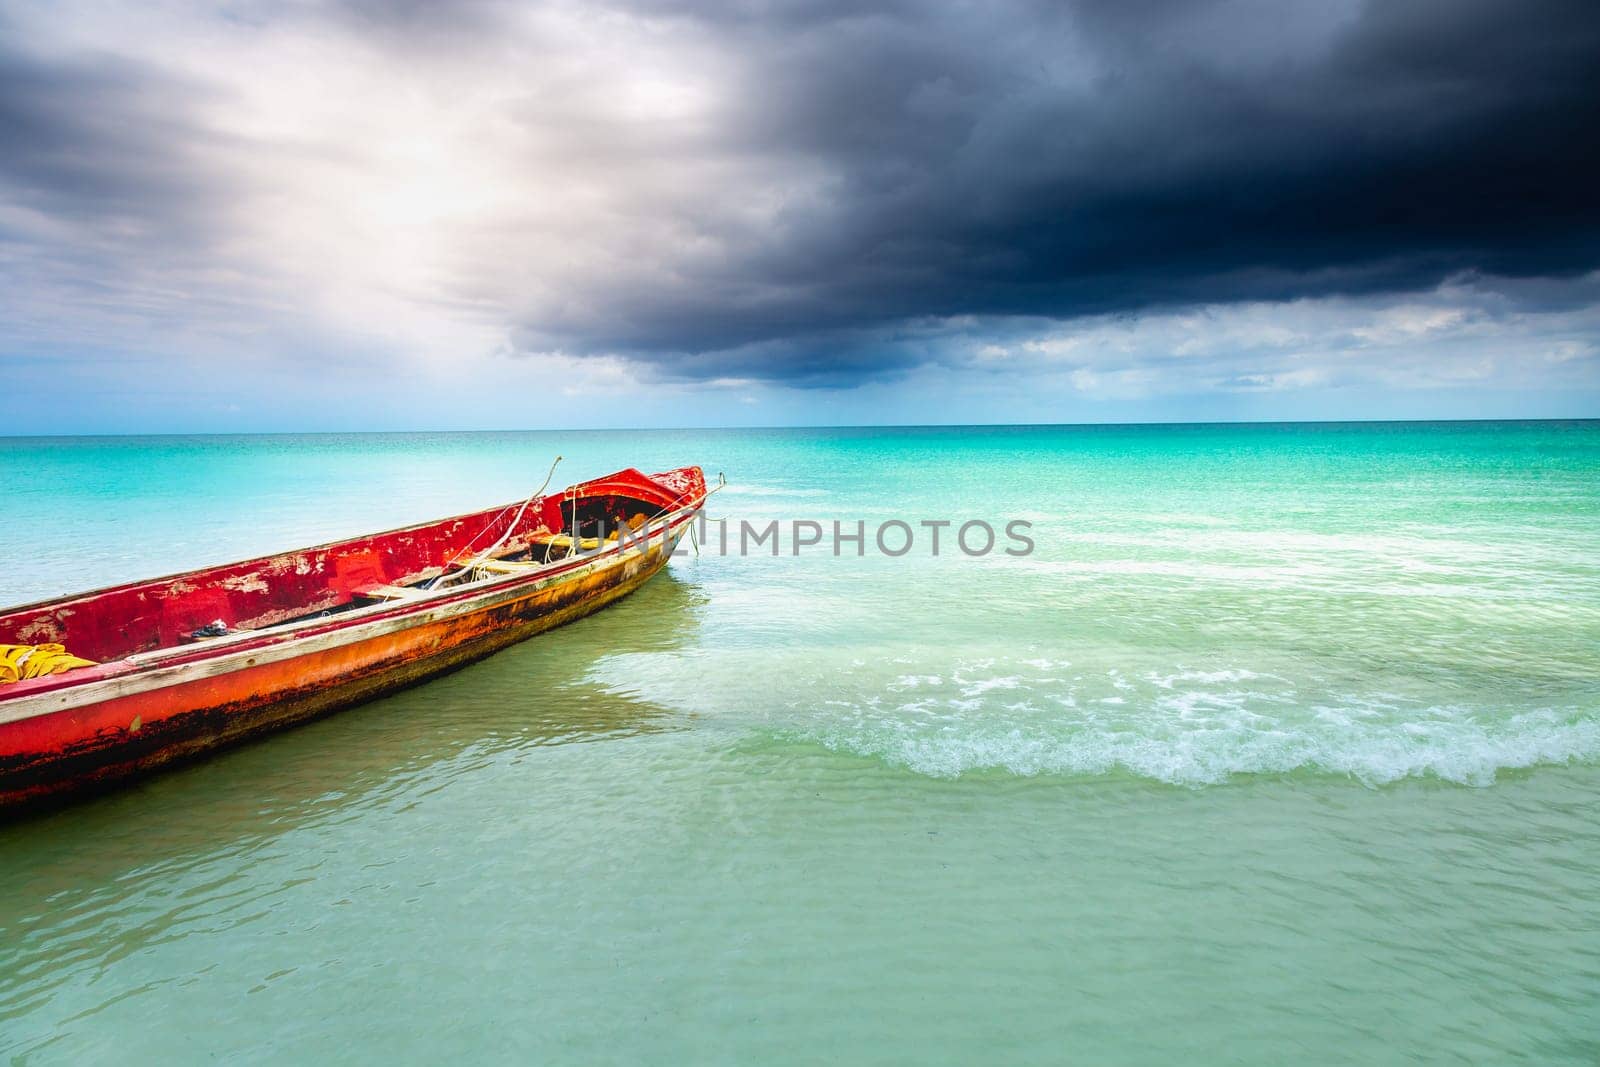 Tropical caribbean beach with storm clouds in idyllic Montego Bay, Jamaica